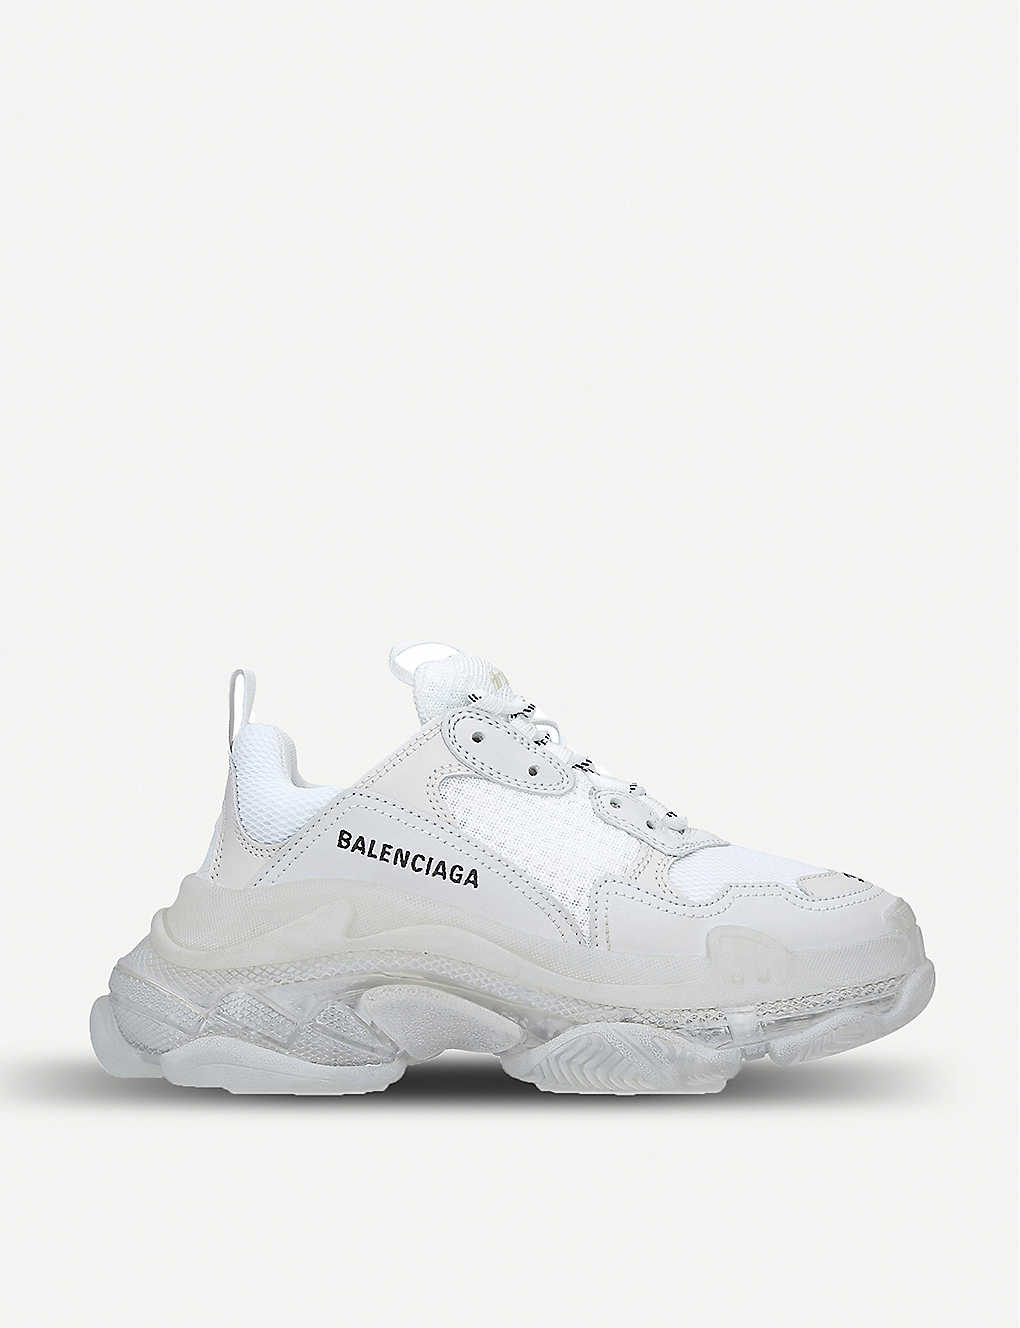 BALENCiAGA Triple S trainers 3 0 Total White Limited Edition